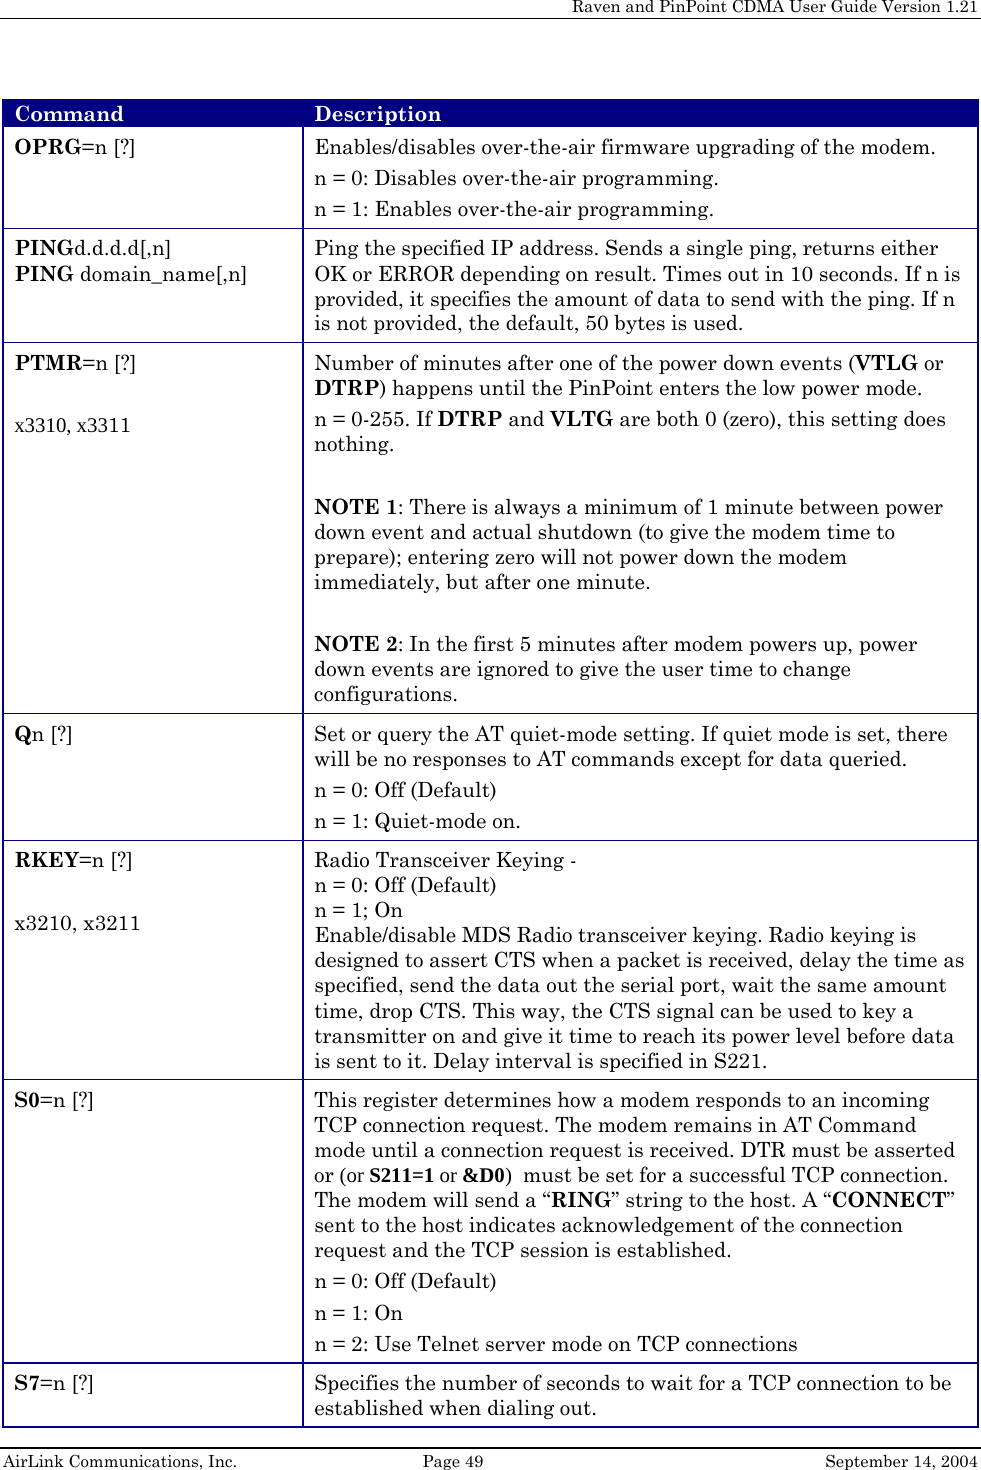     Raven and PinPoint CDMA User Guide Version 1.21  AirLink Communications, Inc.  Page 49  September 14, 2004 Command  Description OPRG=n [?]  Enables/disables over-the-air firmware upgrading of the modem. n = 0: Disables over-the-air programming. n = 1: Enables over-the-air programming. PINGd.d.d.d[,n] PING domain_name[,n] Ping the specified IP address. Sends a single ping, returns either OK or ERROR depending on result. Times out in 10 seconds. If n is provided, it specifies the amount of data to send with the ping. If n is not provided, the default, 50 bytes is used. PTMR=n [?]  x3310, x3311 Number of minutes after one of the power down events (VTLG or DTRP) happens until the PinPoint enters the low power mode. n = 0-255. If DTRP and VLTG are both 0 (zero), this setting does nothing.  NOTE 1: There is always a minimum of 1 minute between power down event and actual shutdown (to give the modem time to prepare); entering zero will not power down the modem immediately, but after one minute.  NOTE 2: In the first 5 minutes after modem powers up, power down events are ignored to give the user time to change configurations. Qn [?]  Set or query the AT quiet-mode setting. If quiet mode is set, there will be no responses to AT commands except for data queried. n = 0: Off (Default) n = 1: Quiet-mode on. RKEY=n [?]  x3210, x3211 Radio Transceiver Keying -  n = 0: Off (Default) n = 1; On Enable/disable MDS Radio transceiver keying. Radio keying is designed to assert CTS when a packet is received, delay the time as specified, send the data out the serial port, wait the same amount time, drop CTS. This way, the CTS signal can be used to key a transmitter on and give it time to reach its power level before data is sent to it. Delay interval is specified in S221. S0=n [?]  This register determines how a modem responds to an incoming TCP connection request. The modem remains in AT Command mode until a connection request is received. DTR must be asserted or (or S211=1 or &amp;D0)  must be set for a successful TCP connection. The modem will send a “RING” string to the host. A “CONNECT” sent to the host indicates acknowledgement of the connection request and the TCP session is established. n = 0: Off (Default) n = 1: On n = 2: Use Telnet server mode on TCP connections S7=n [?]  Specifies the number of seconds to wait for a TCP connection to be established when dialing out. 